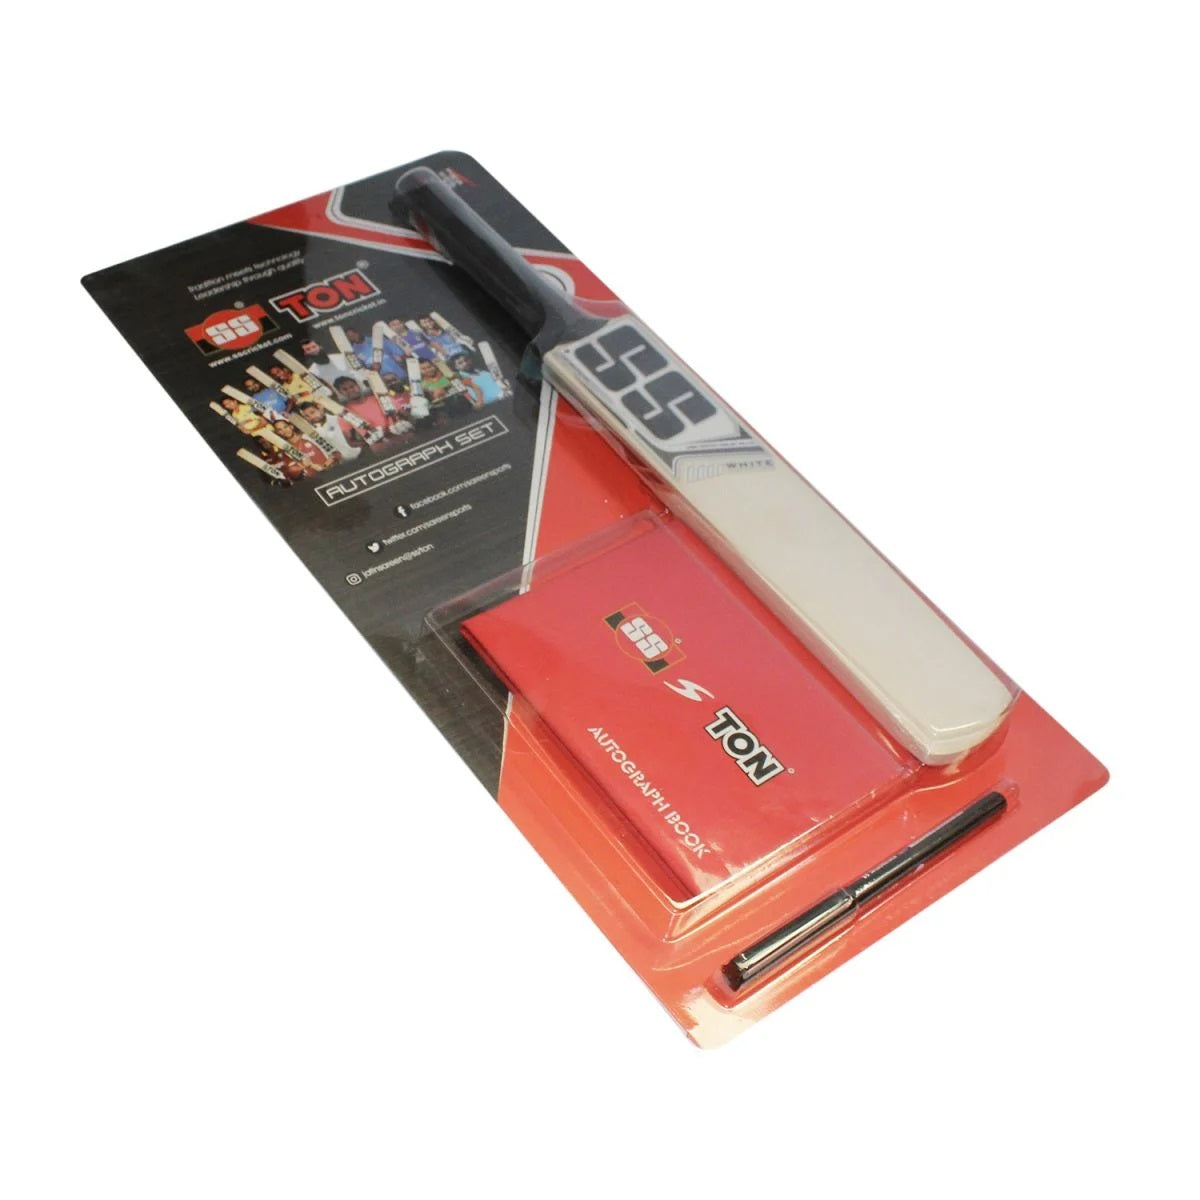 SS Autograph kit containing a mini bat, an autograph book, and a pen, designed for cricket fans and players to collect signatures and memories.